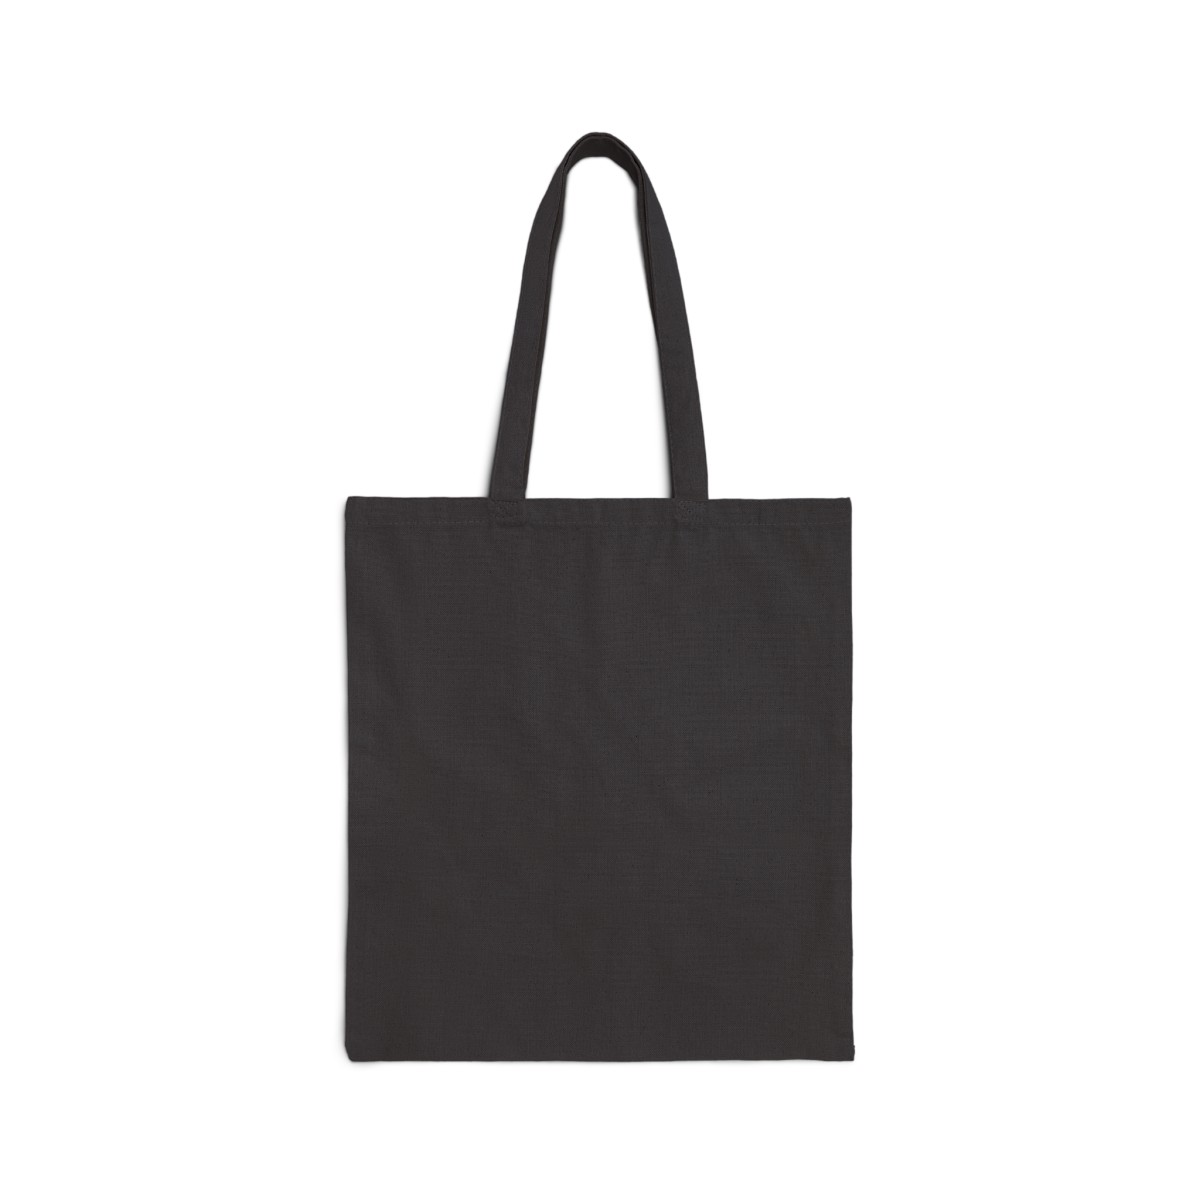 "Comes in waves" Cotton Canvas Tote Bag product thumbnail image